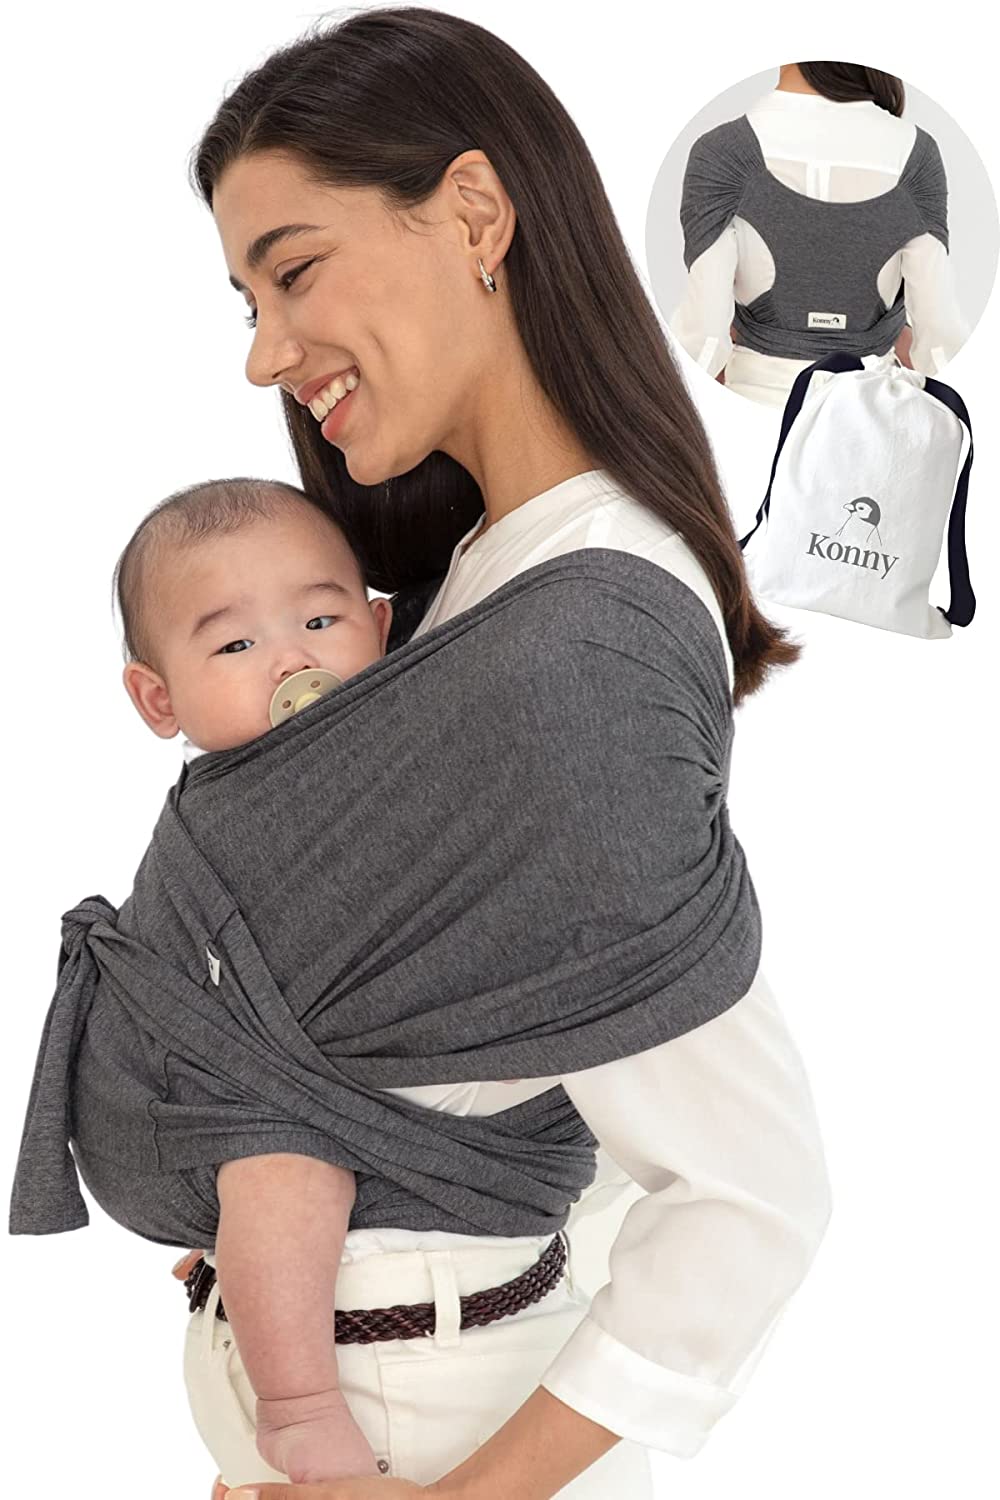 Konny Baby Carrier | Ultra-light, Easy Baby Sling | Newborns, Infants up to 20 kg Toddlers | Soft and Breathable Fabric | Useful Sleep Solution (Anthracite, 2XL)